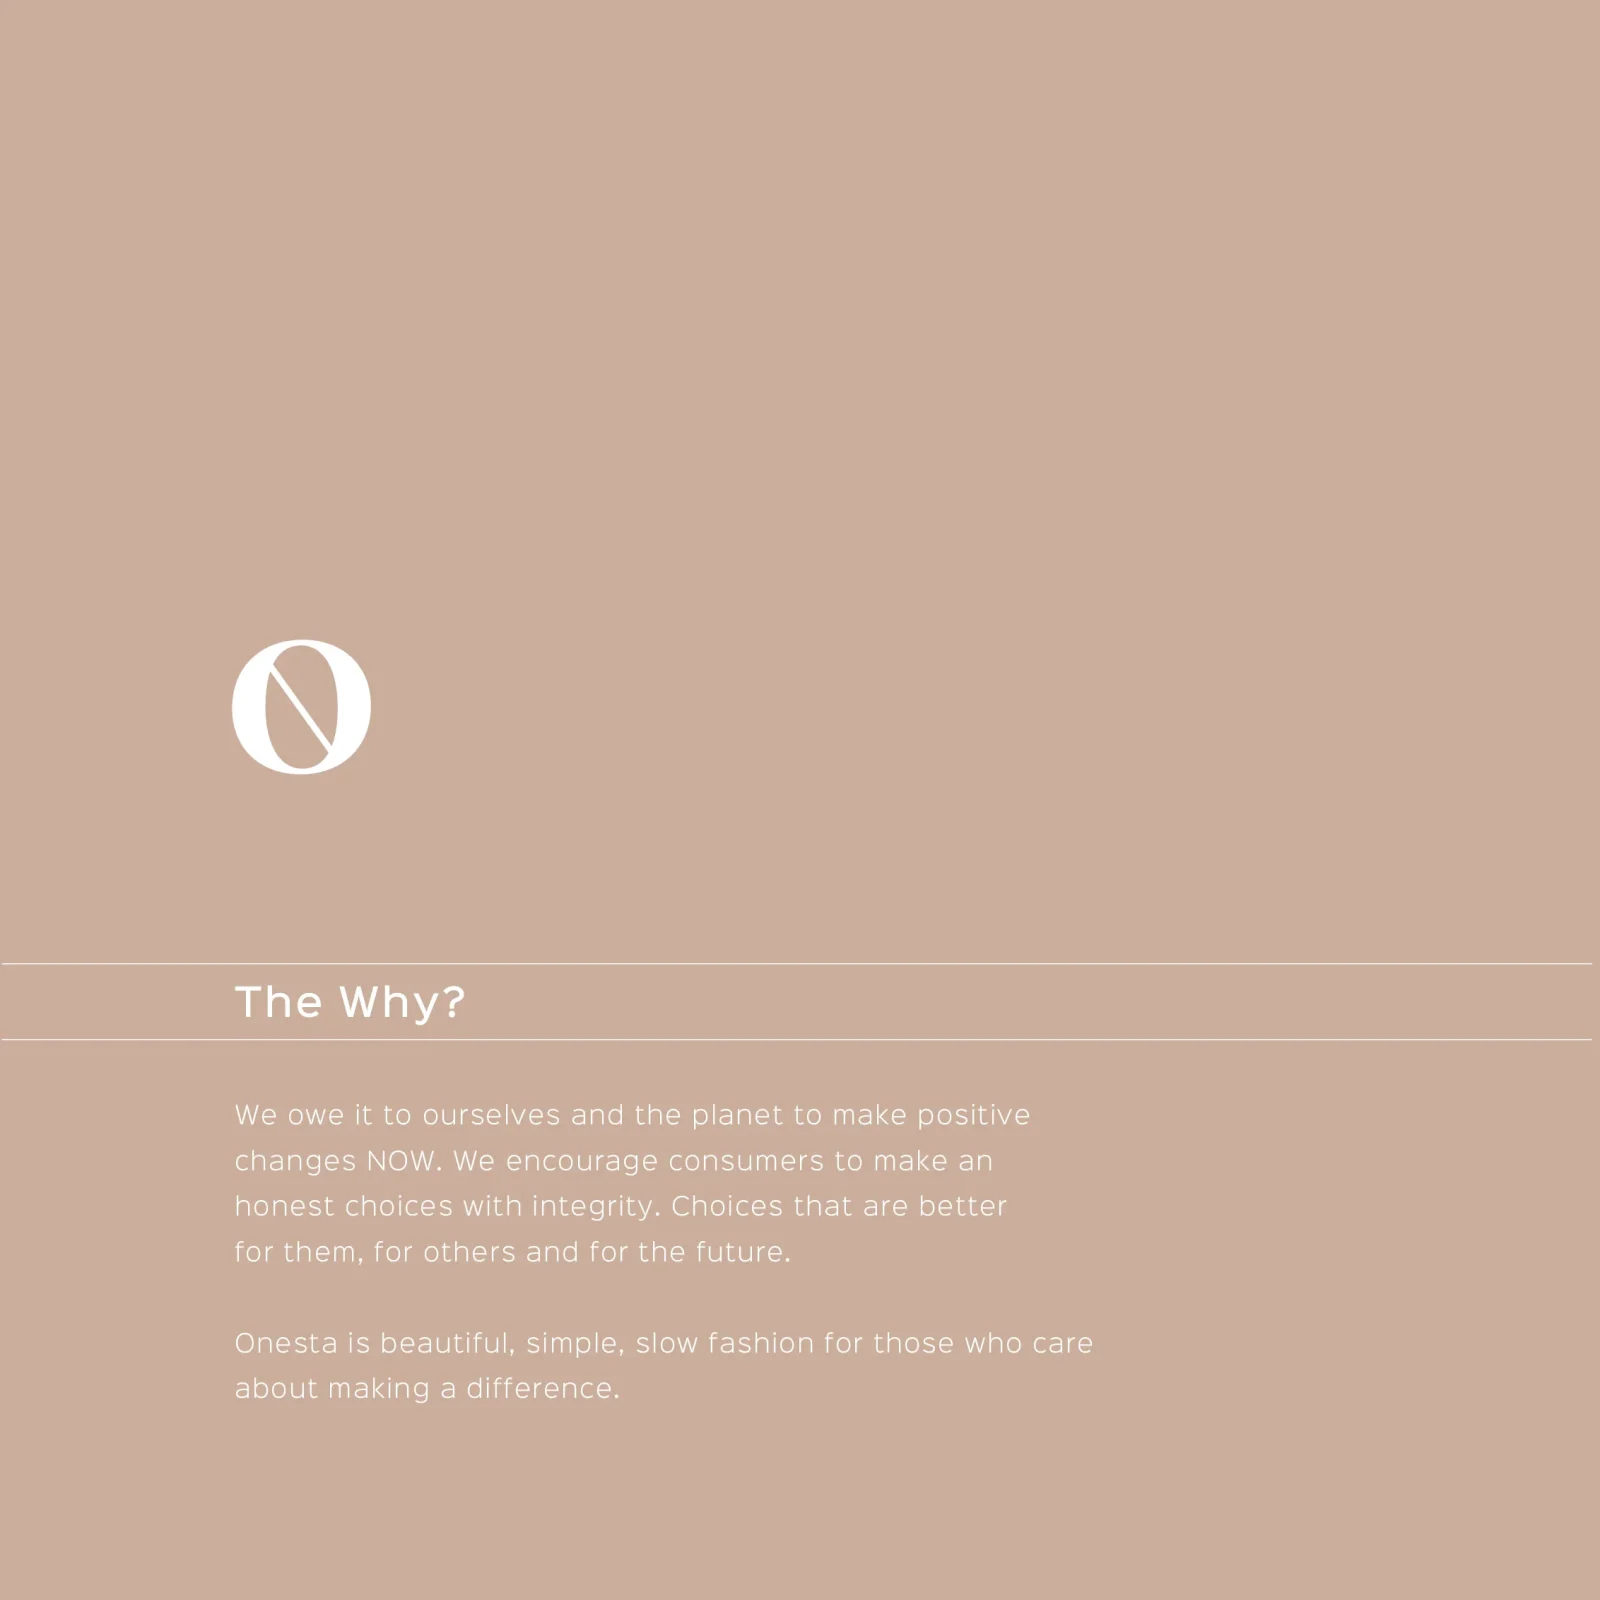 Placeholder image with no visual content, just a grey background and a white, incomplete circle at the center. Text discusses choosing sustainable, slow fashion options through design agency Bristol.